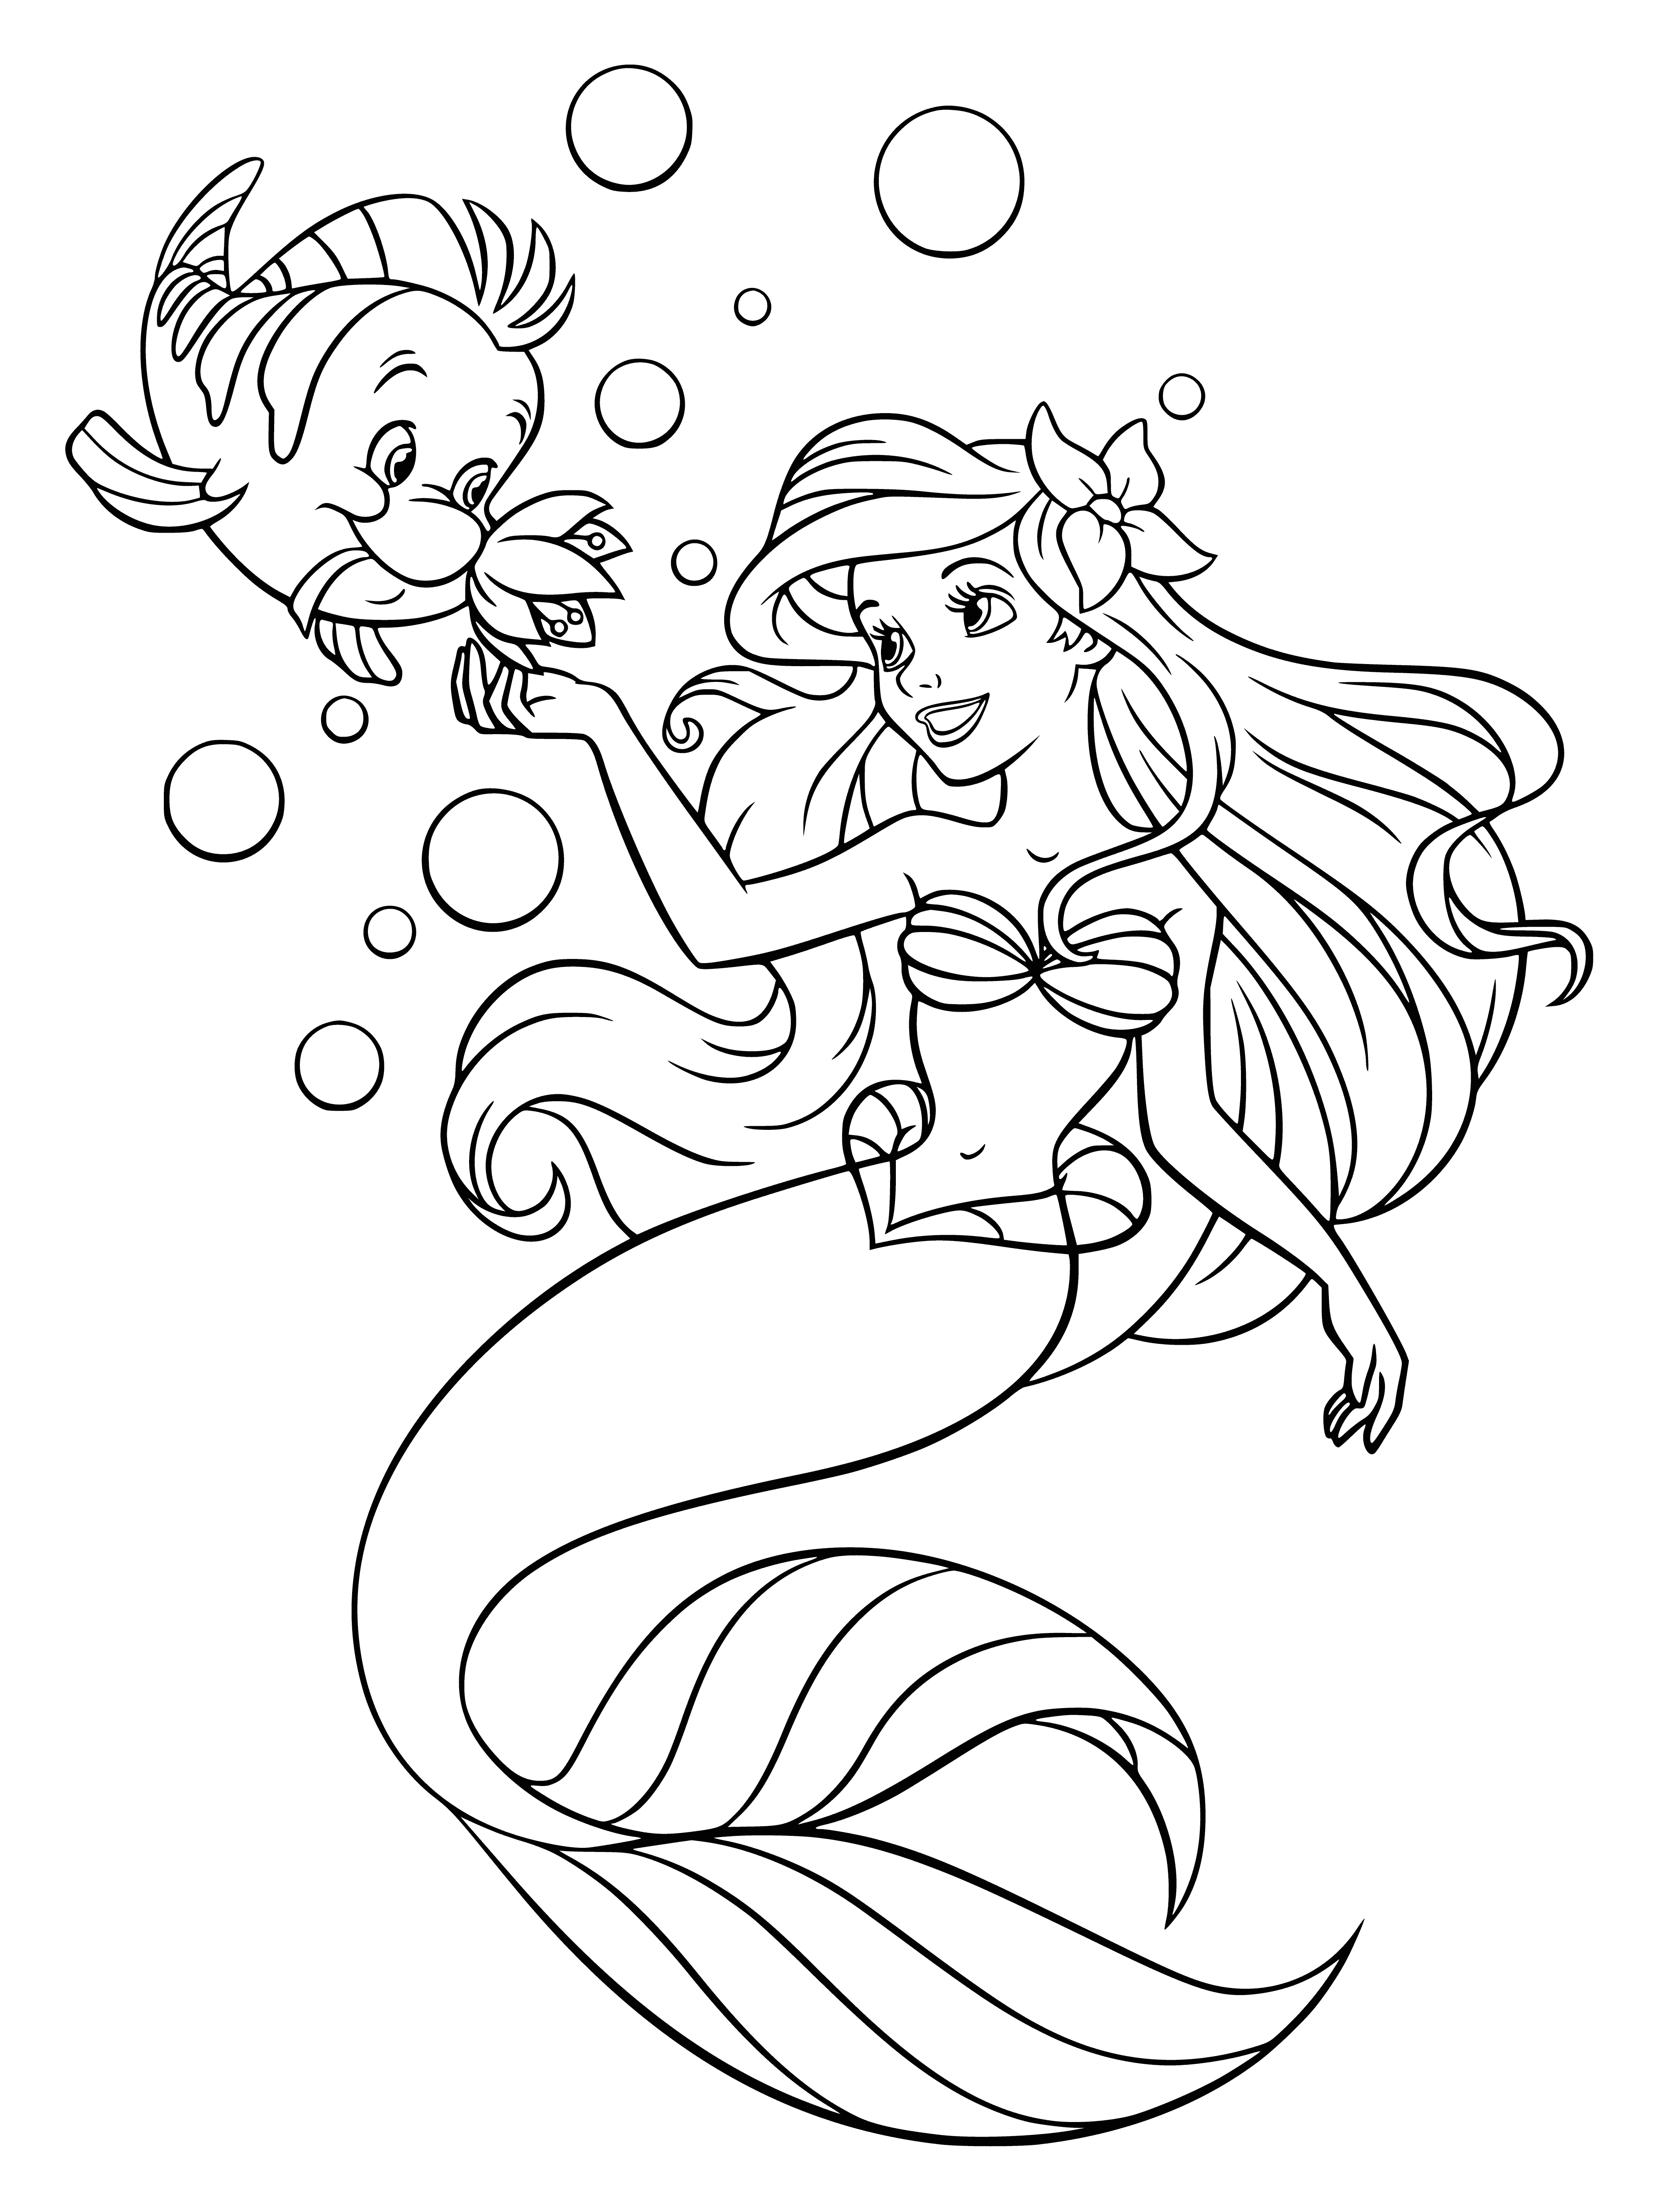 coloring page: Ariel & Flounder, best friends & adventurers, explore new areas & discover new things.